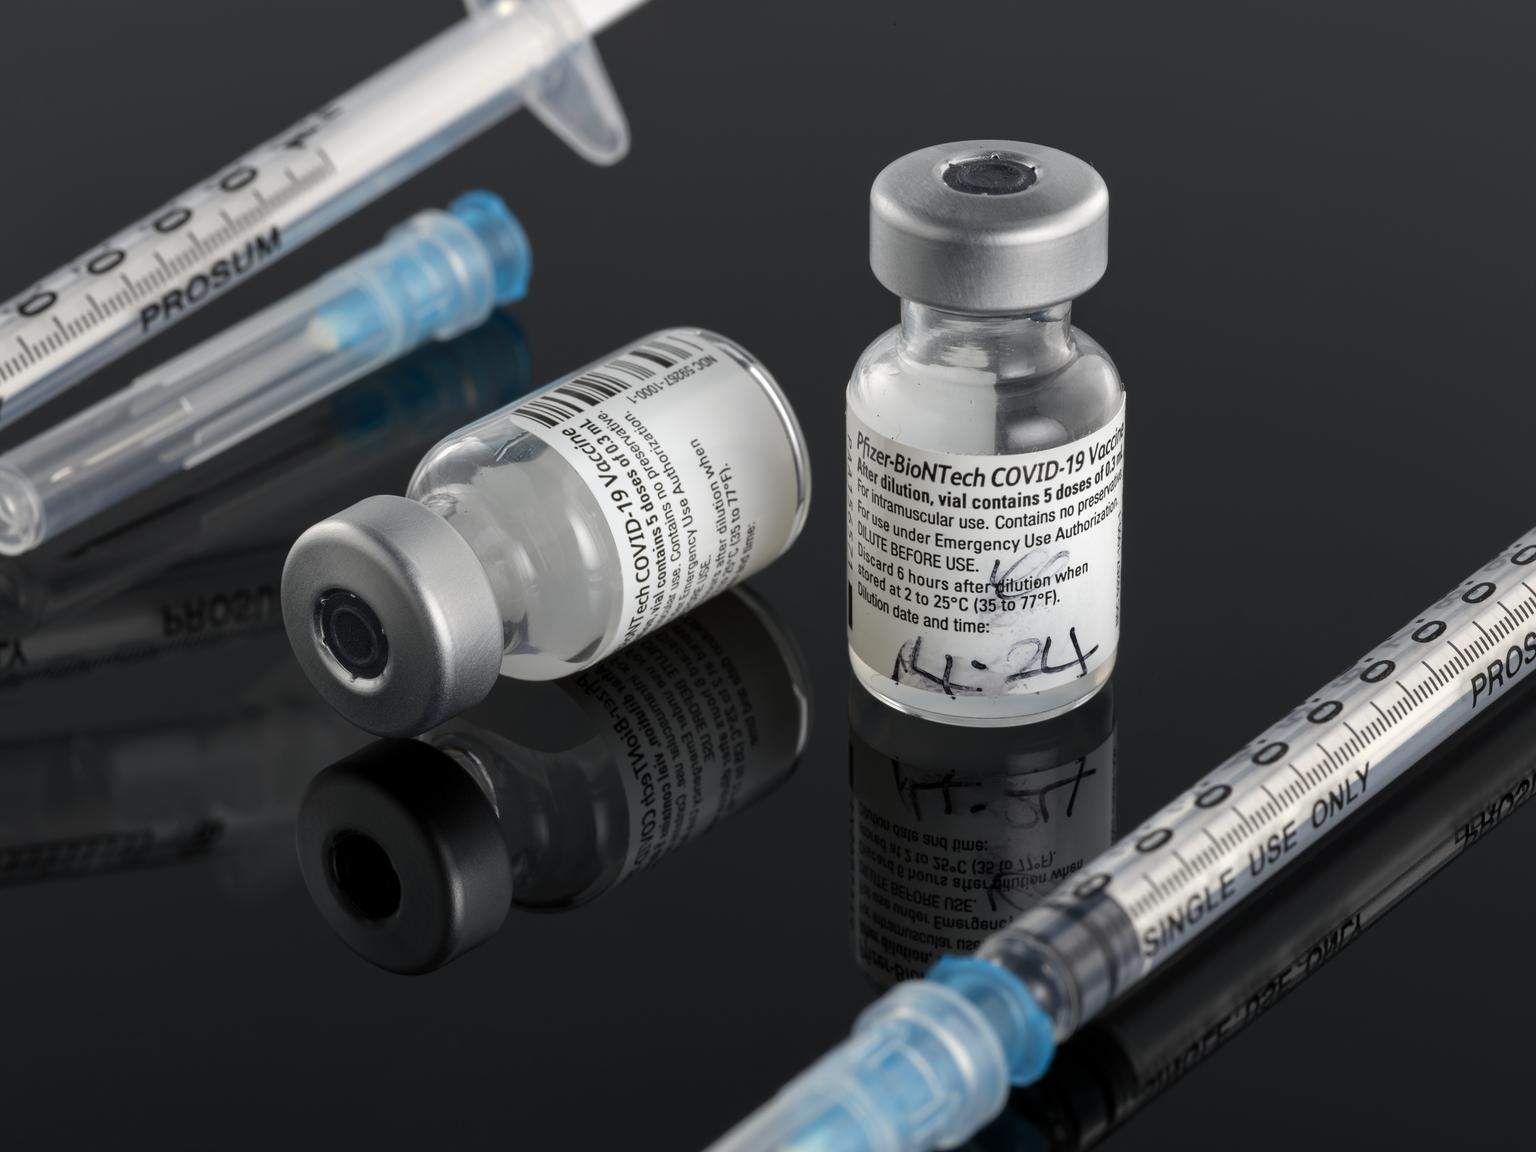 Empty glass vial that contained the Pfizer-BioNTech vaccine against COVID-19 given to the first individual vaccinated in the UK's mass vaccination campaign, Margaret Keenan, on 8 December 2020. 